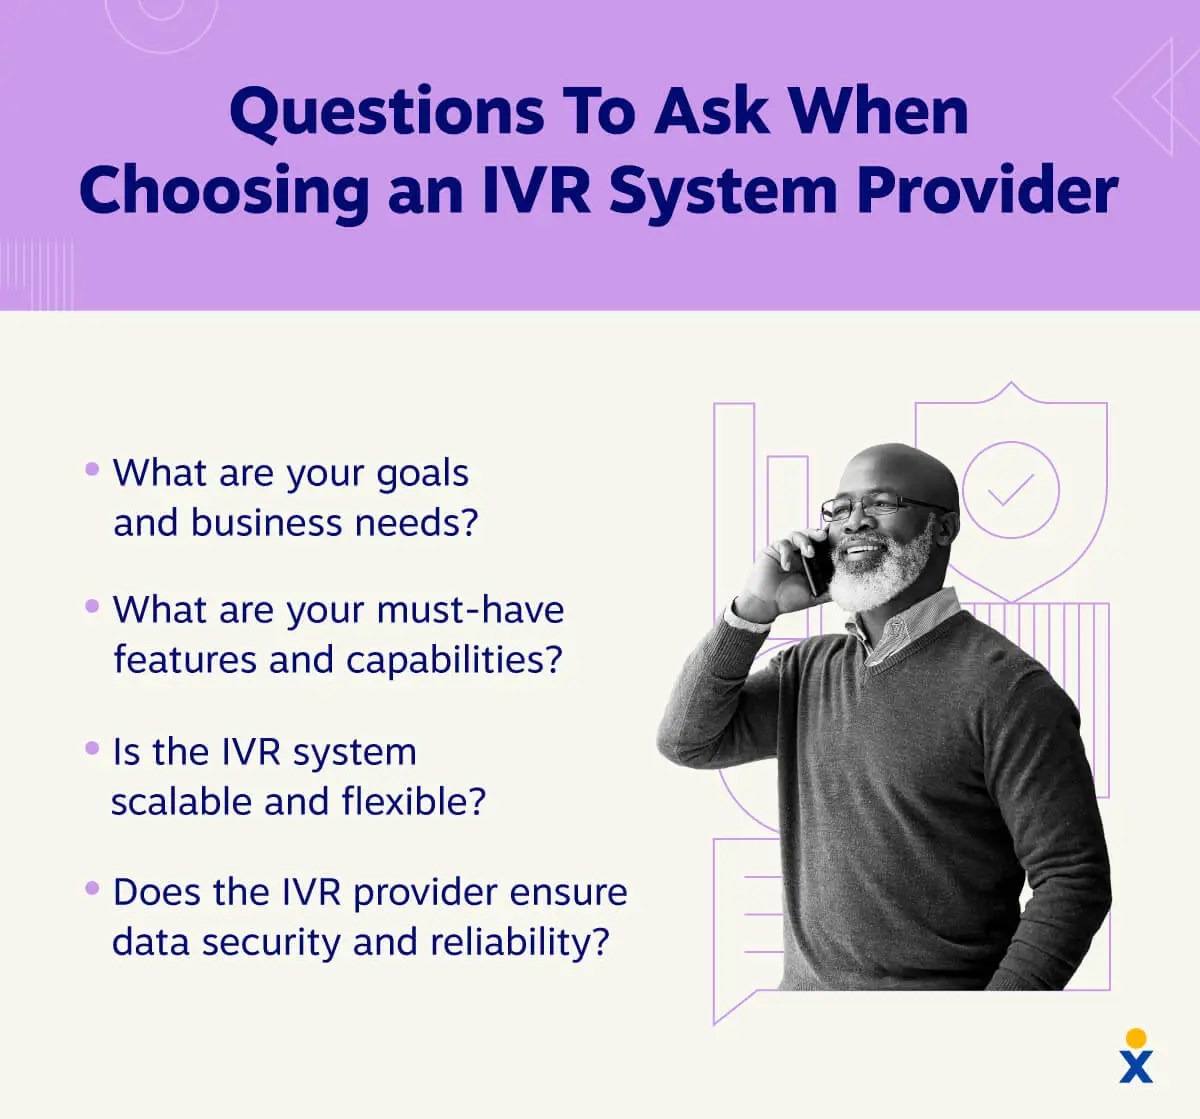 A person talking on the phone stands next to a list of questions to ask when choosing the best IVR system provider.